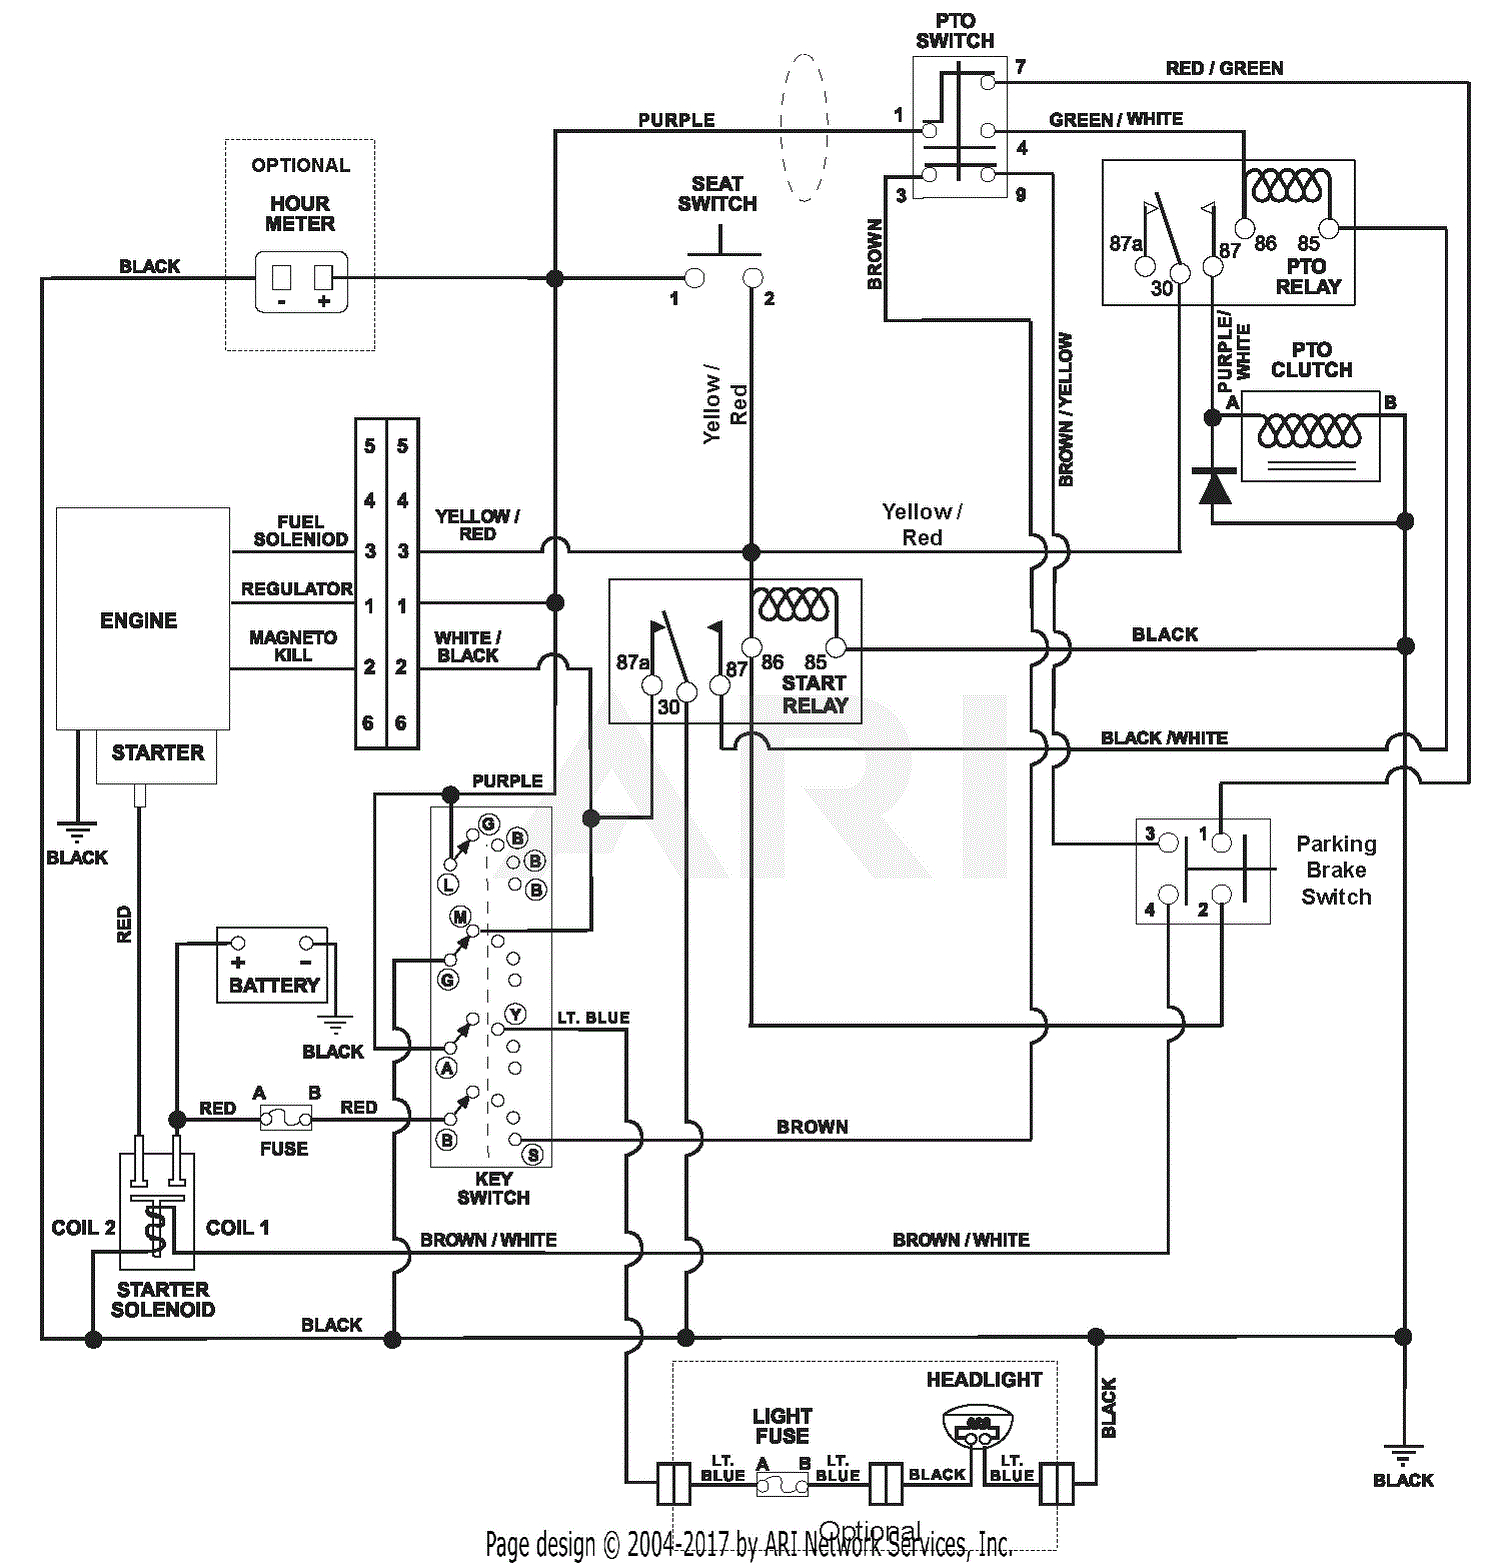 13 hp briggs and stratton wiring diagram wiring diagram blog 14 hp briggs and stratton wiring diagram 13 hp briggs and stratton wiring diagram